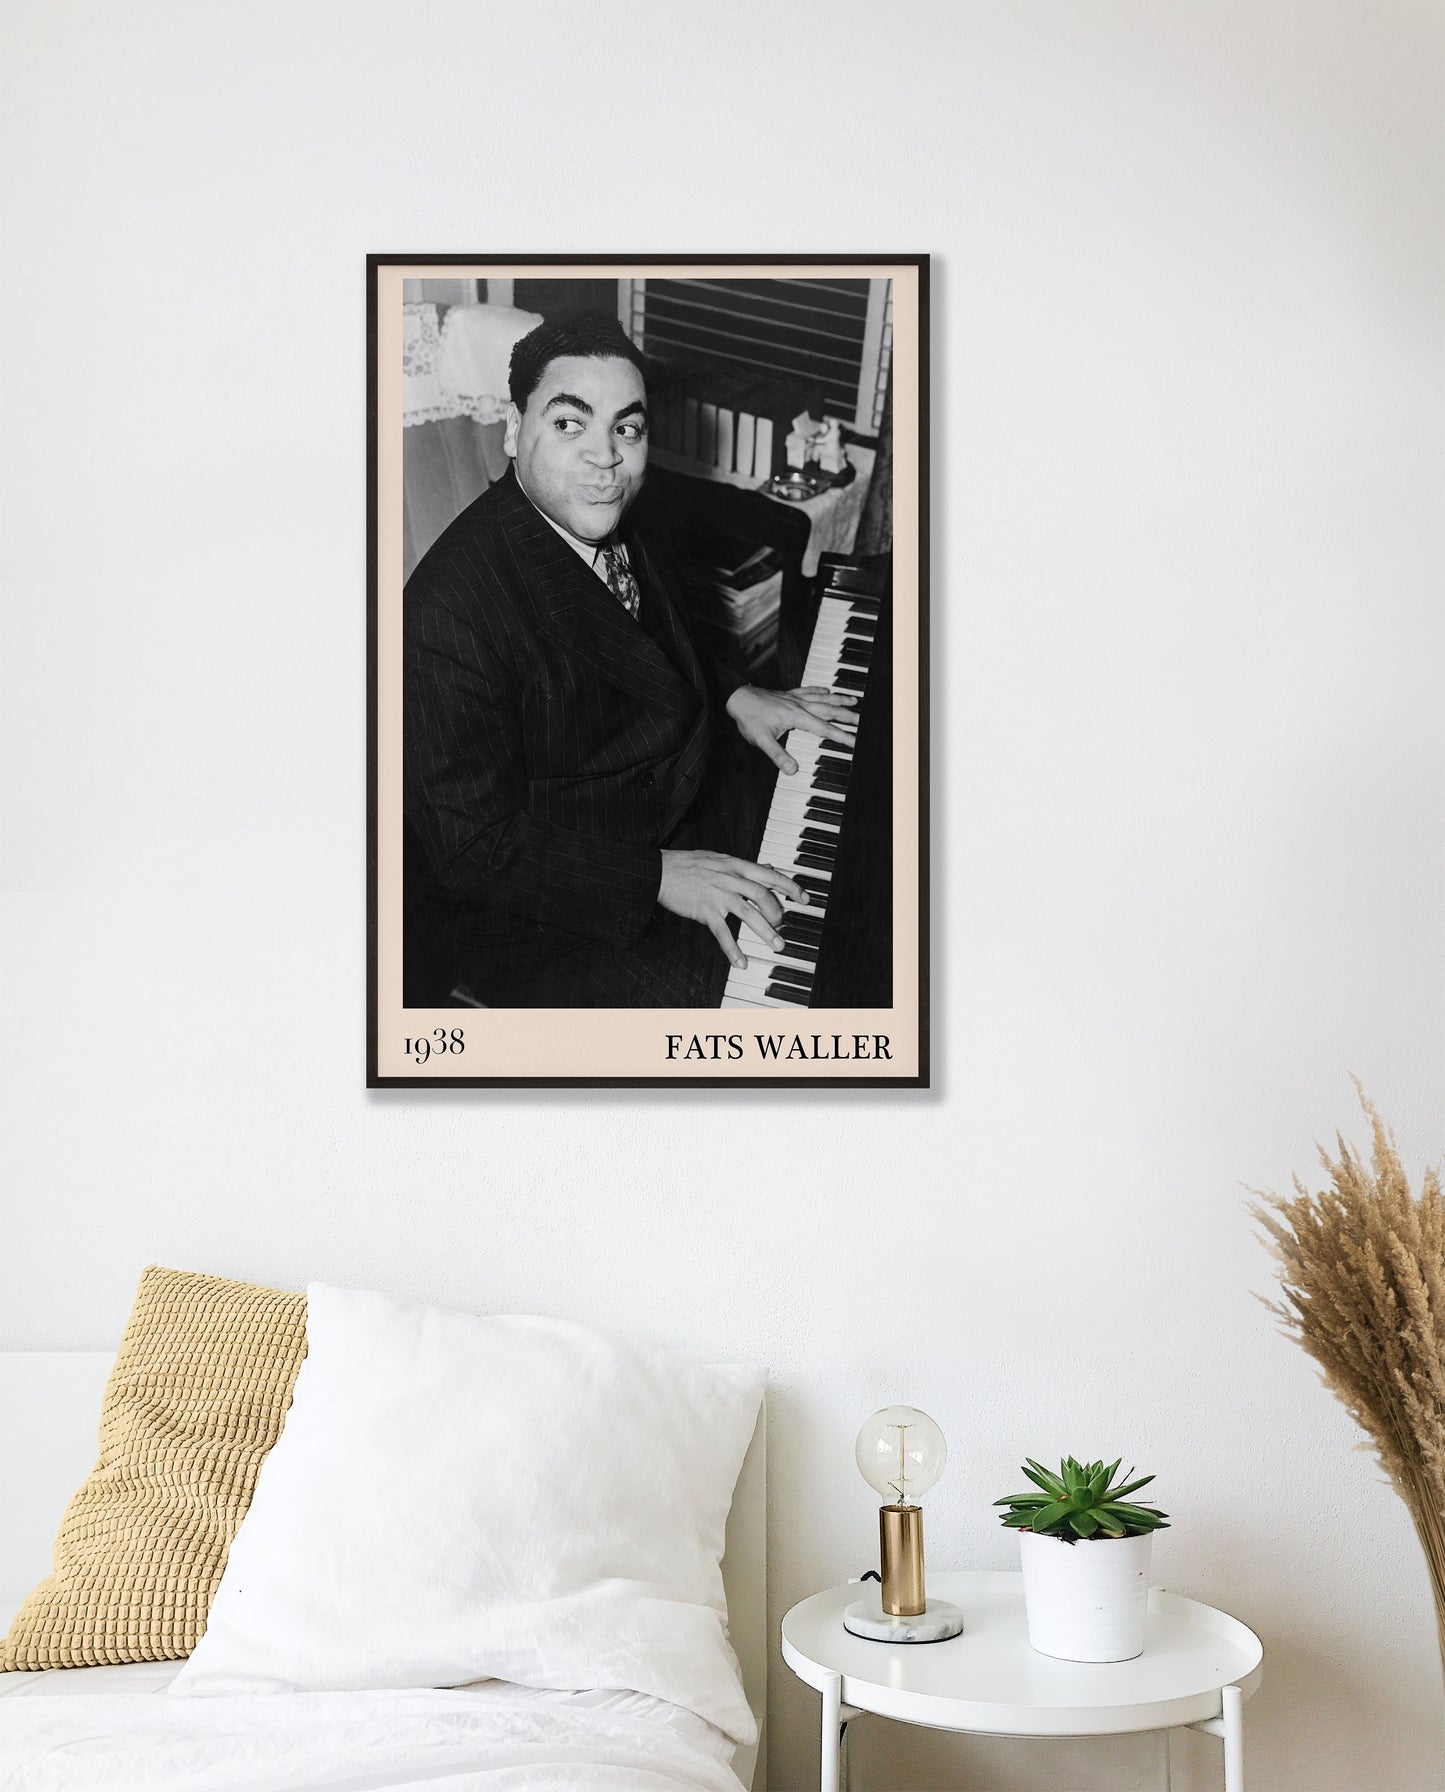 1938 photograph of Fats Waller crafted into a cool black framed jazz poster. The poster is hanging on a white bedroom room wall.